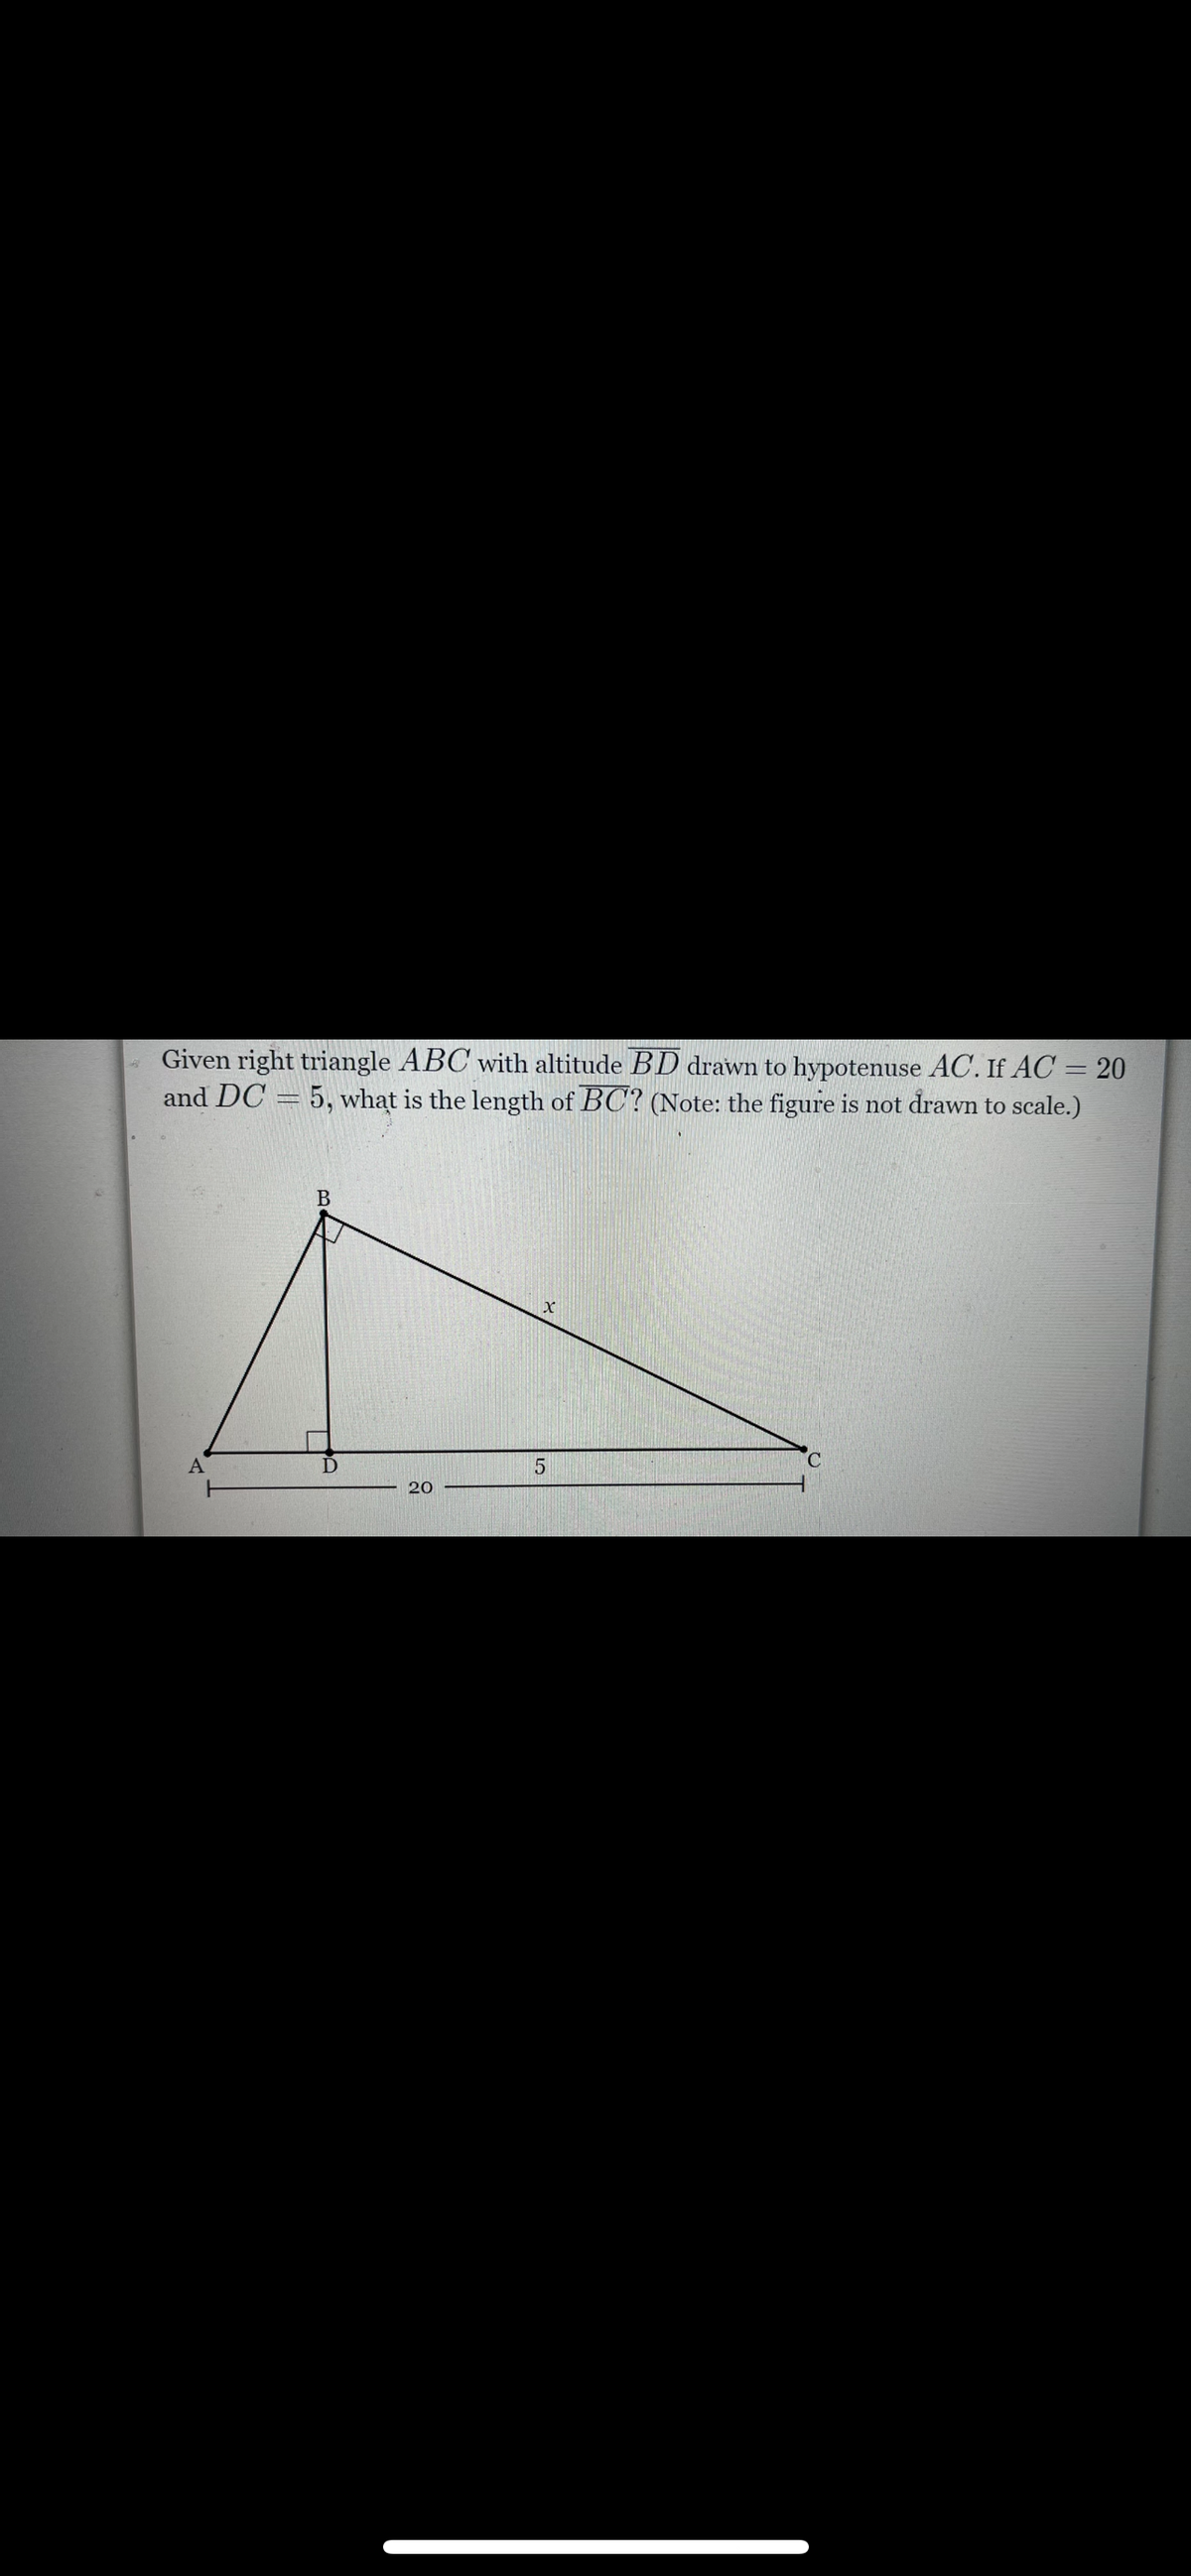 Given right triangle ABC with altitude BD drawn to hypotenuse AC. If AC = 20
and DC = 5, what is the length of BC? (Note: the figure is not drawn to scale.)
A
C.
20
